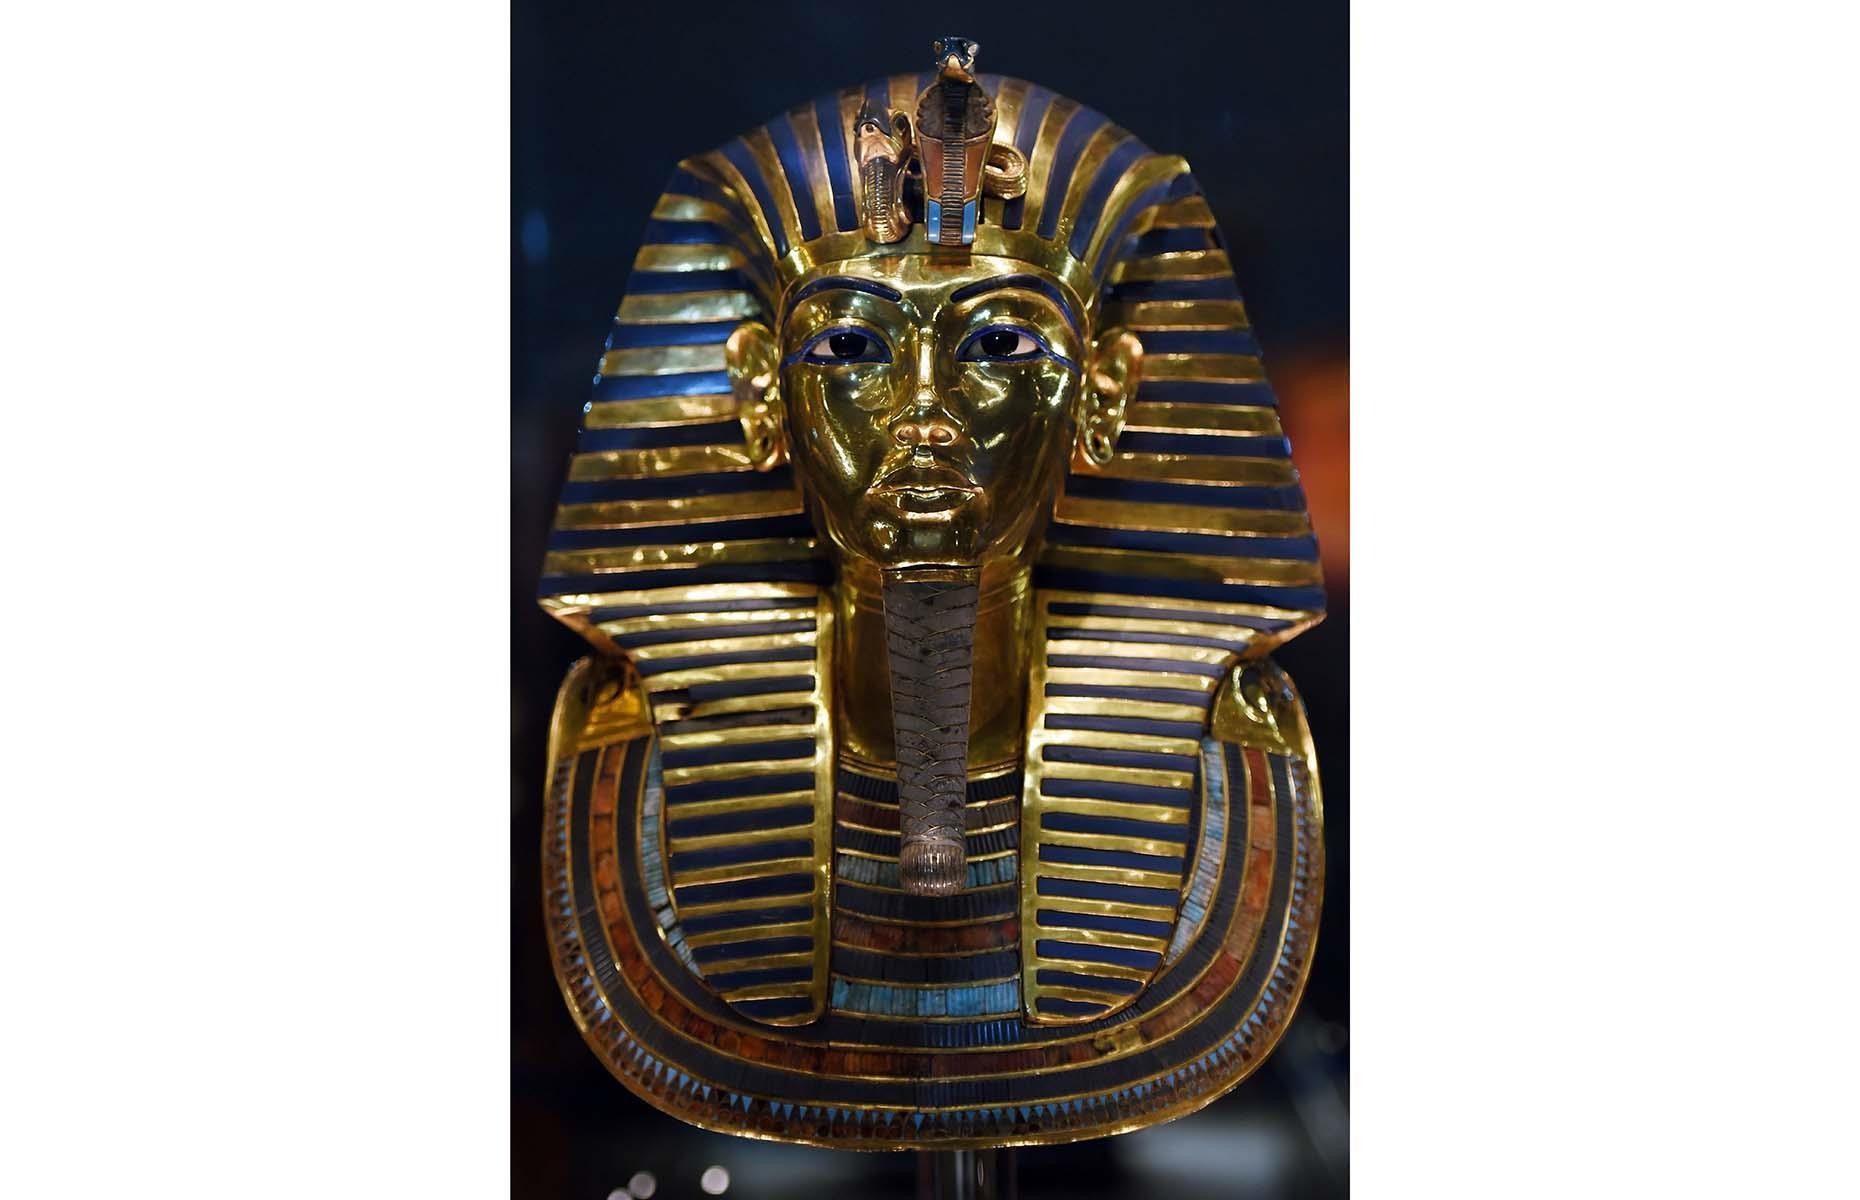 <p>Tutankhamun's tomb is one of the most famous in the Valley of the Kings, even though it wasn't discovered until 1922. His legendary funerary mask was made from 22lbs (10kg) of solid gold, as well as lapis lazuli, quartz, glass and obsidian. His body was wrapped in resin-soaked bandages and was accompanied by items that would help him into the afterlife. Some have speculated that the tomb he was found in seems second-hand – could it have been intended for his stepmother, Queen Nefertiti?</p>